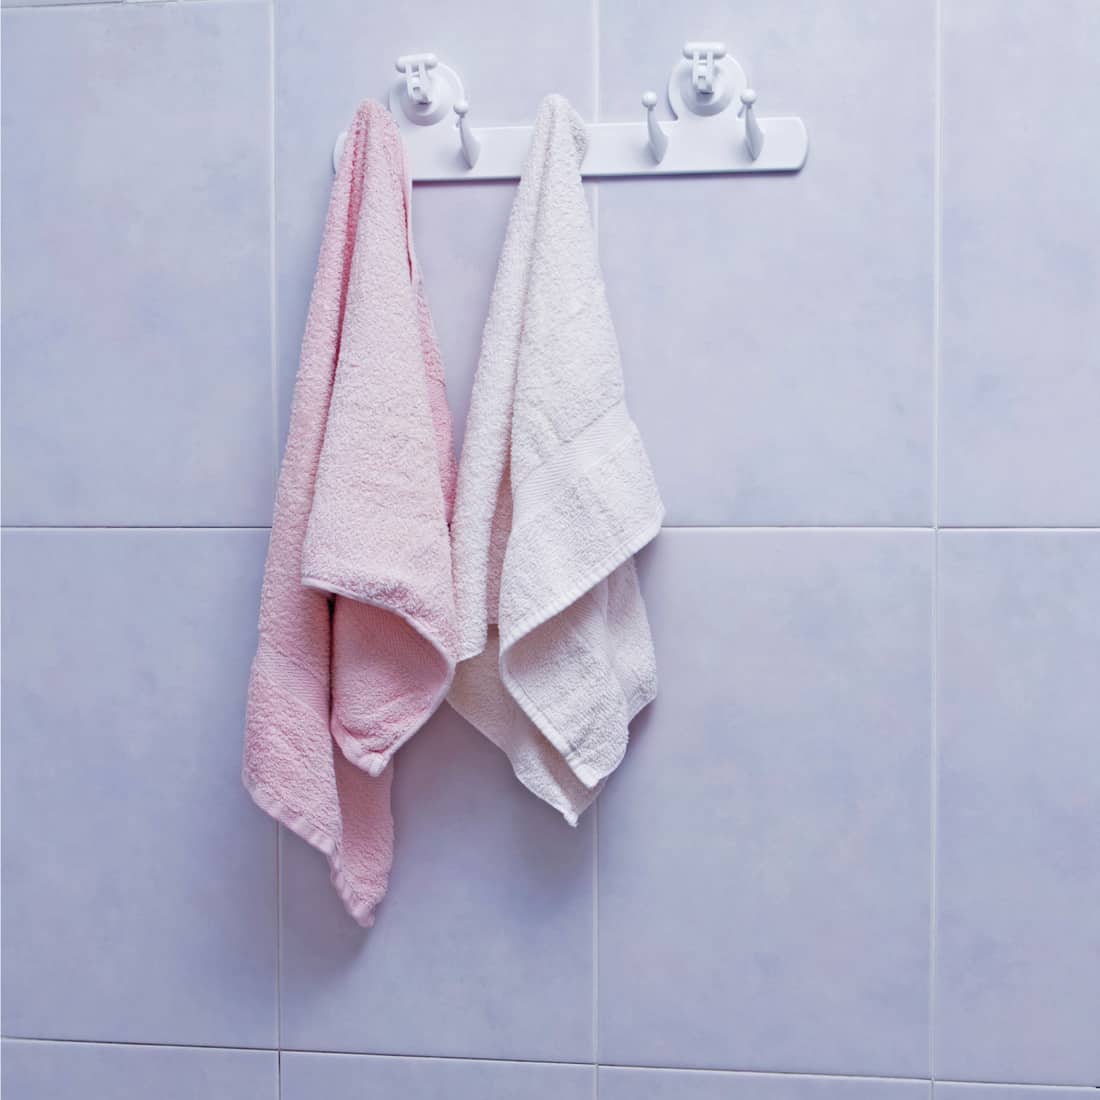 Towels hanging on the tiled wall background in the bathroom